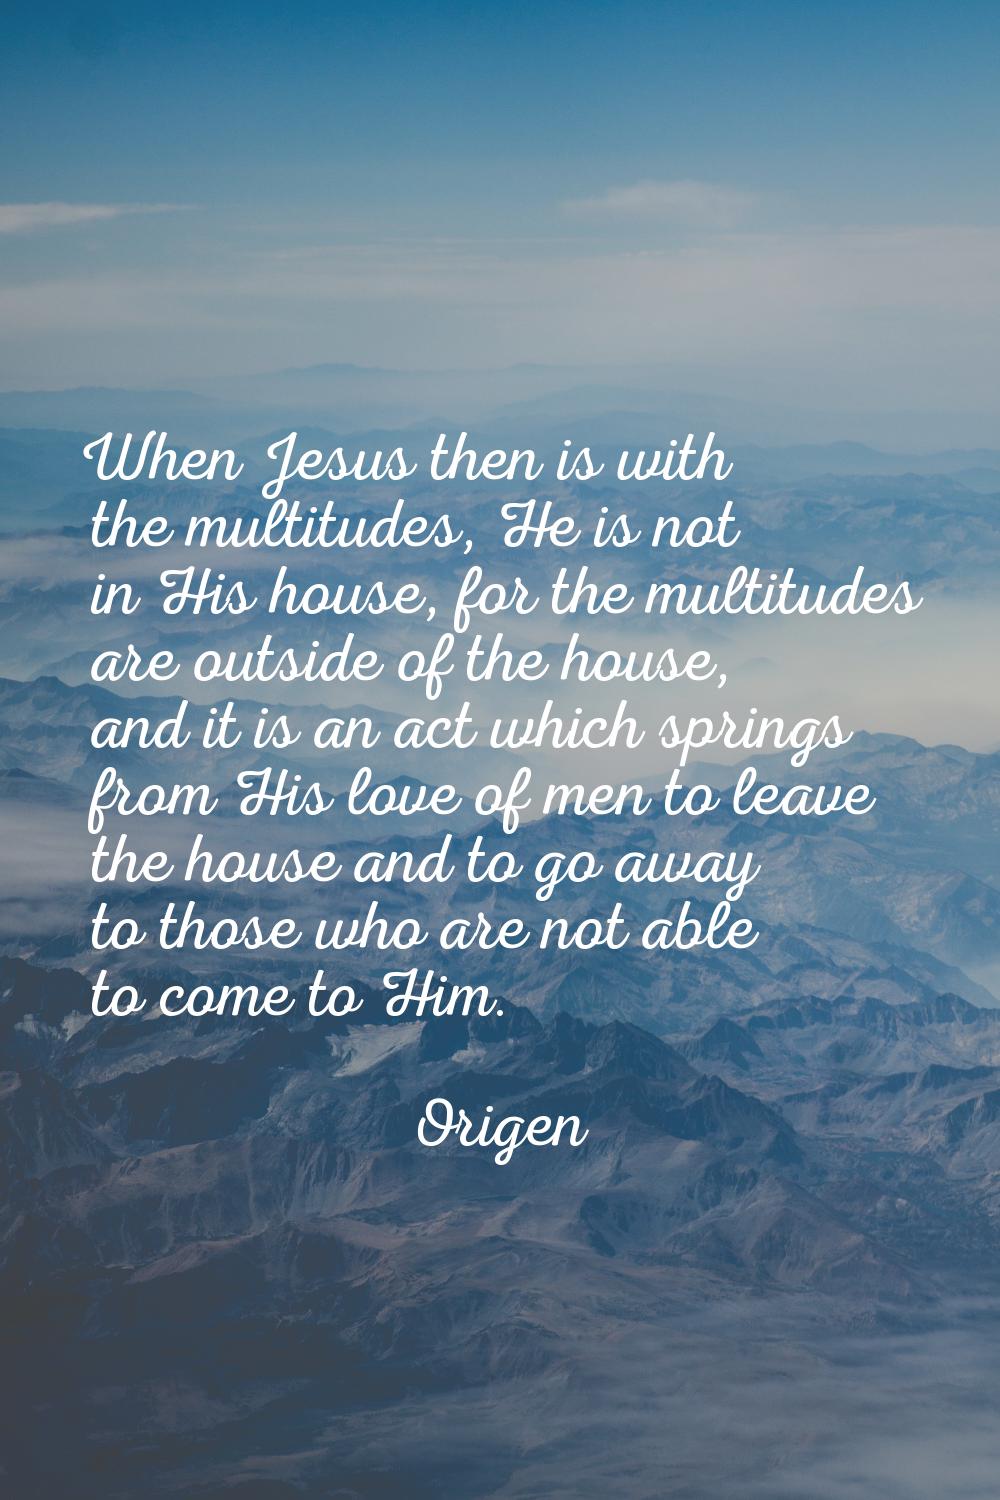 When Jesus then is with the multitudes, He is not in His house, for the multitudes are outside of t